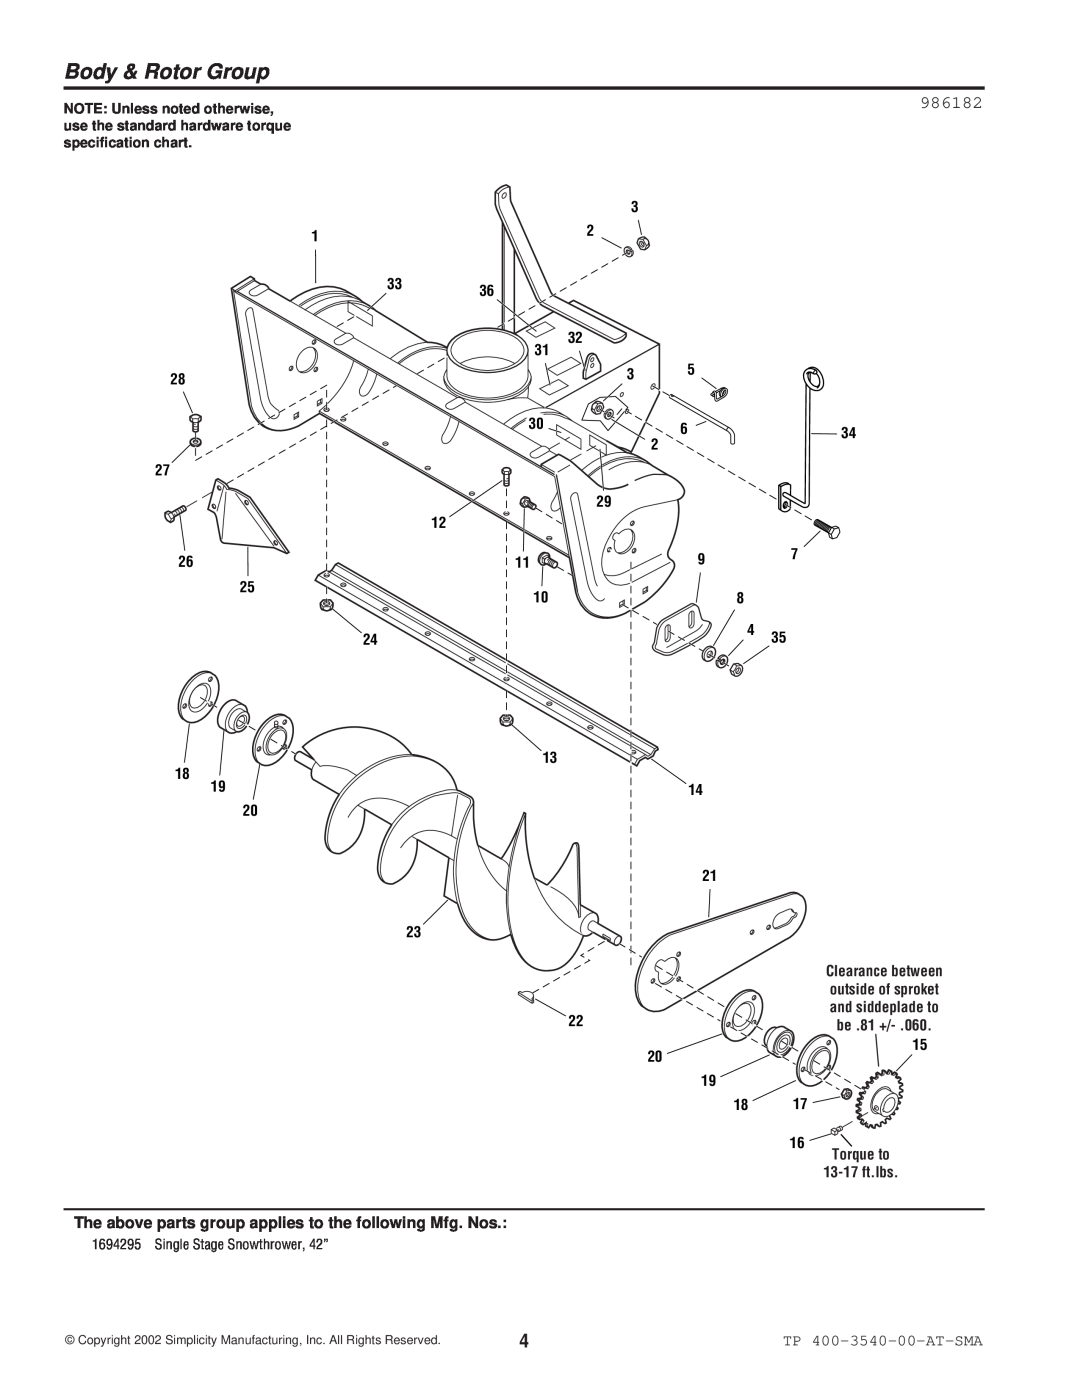 Snapper manual Body & Rotor Group, 986182, TP 400-3540-00-AT-SMA, Torque to 13-17ft.lbs, Single Stage Snowthrower, 42” 